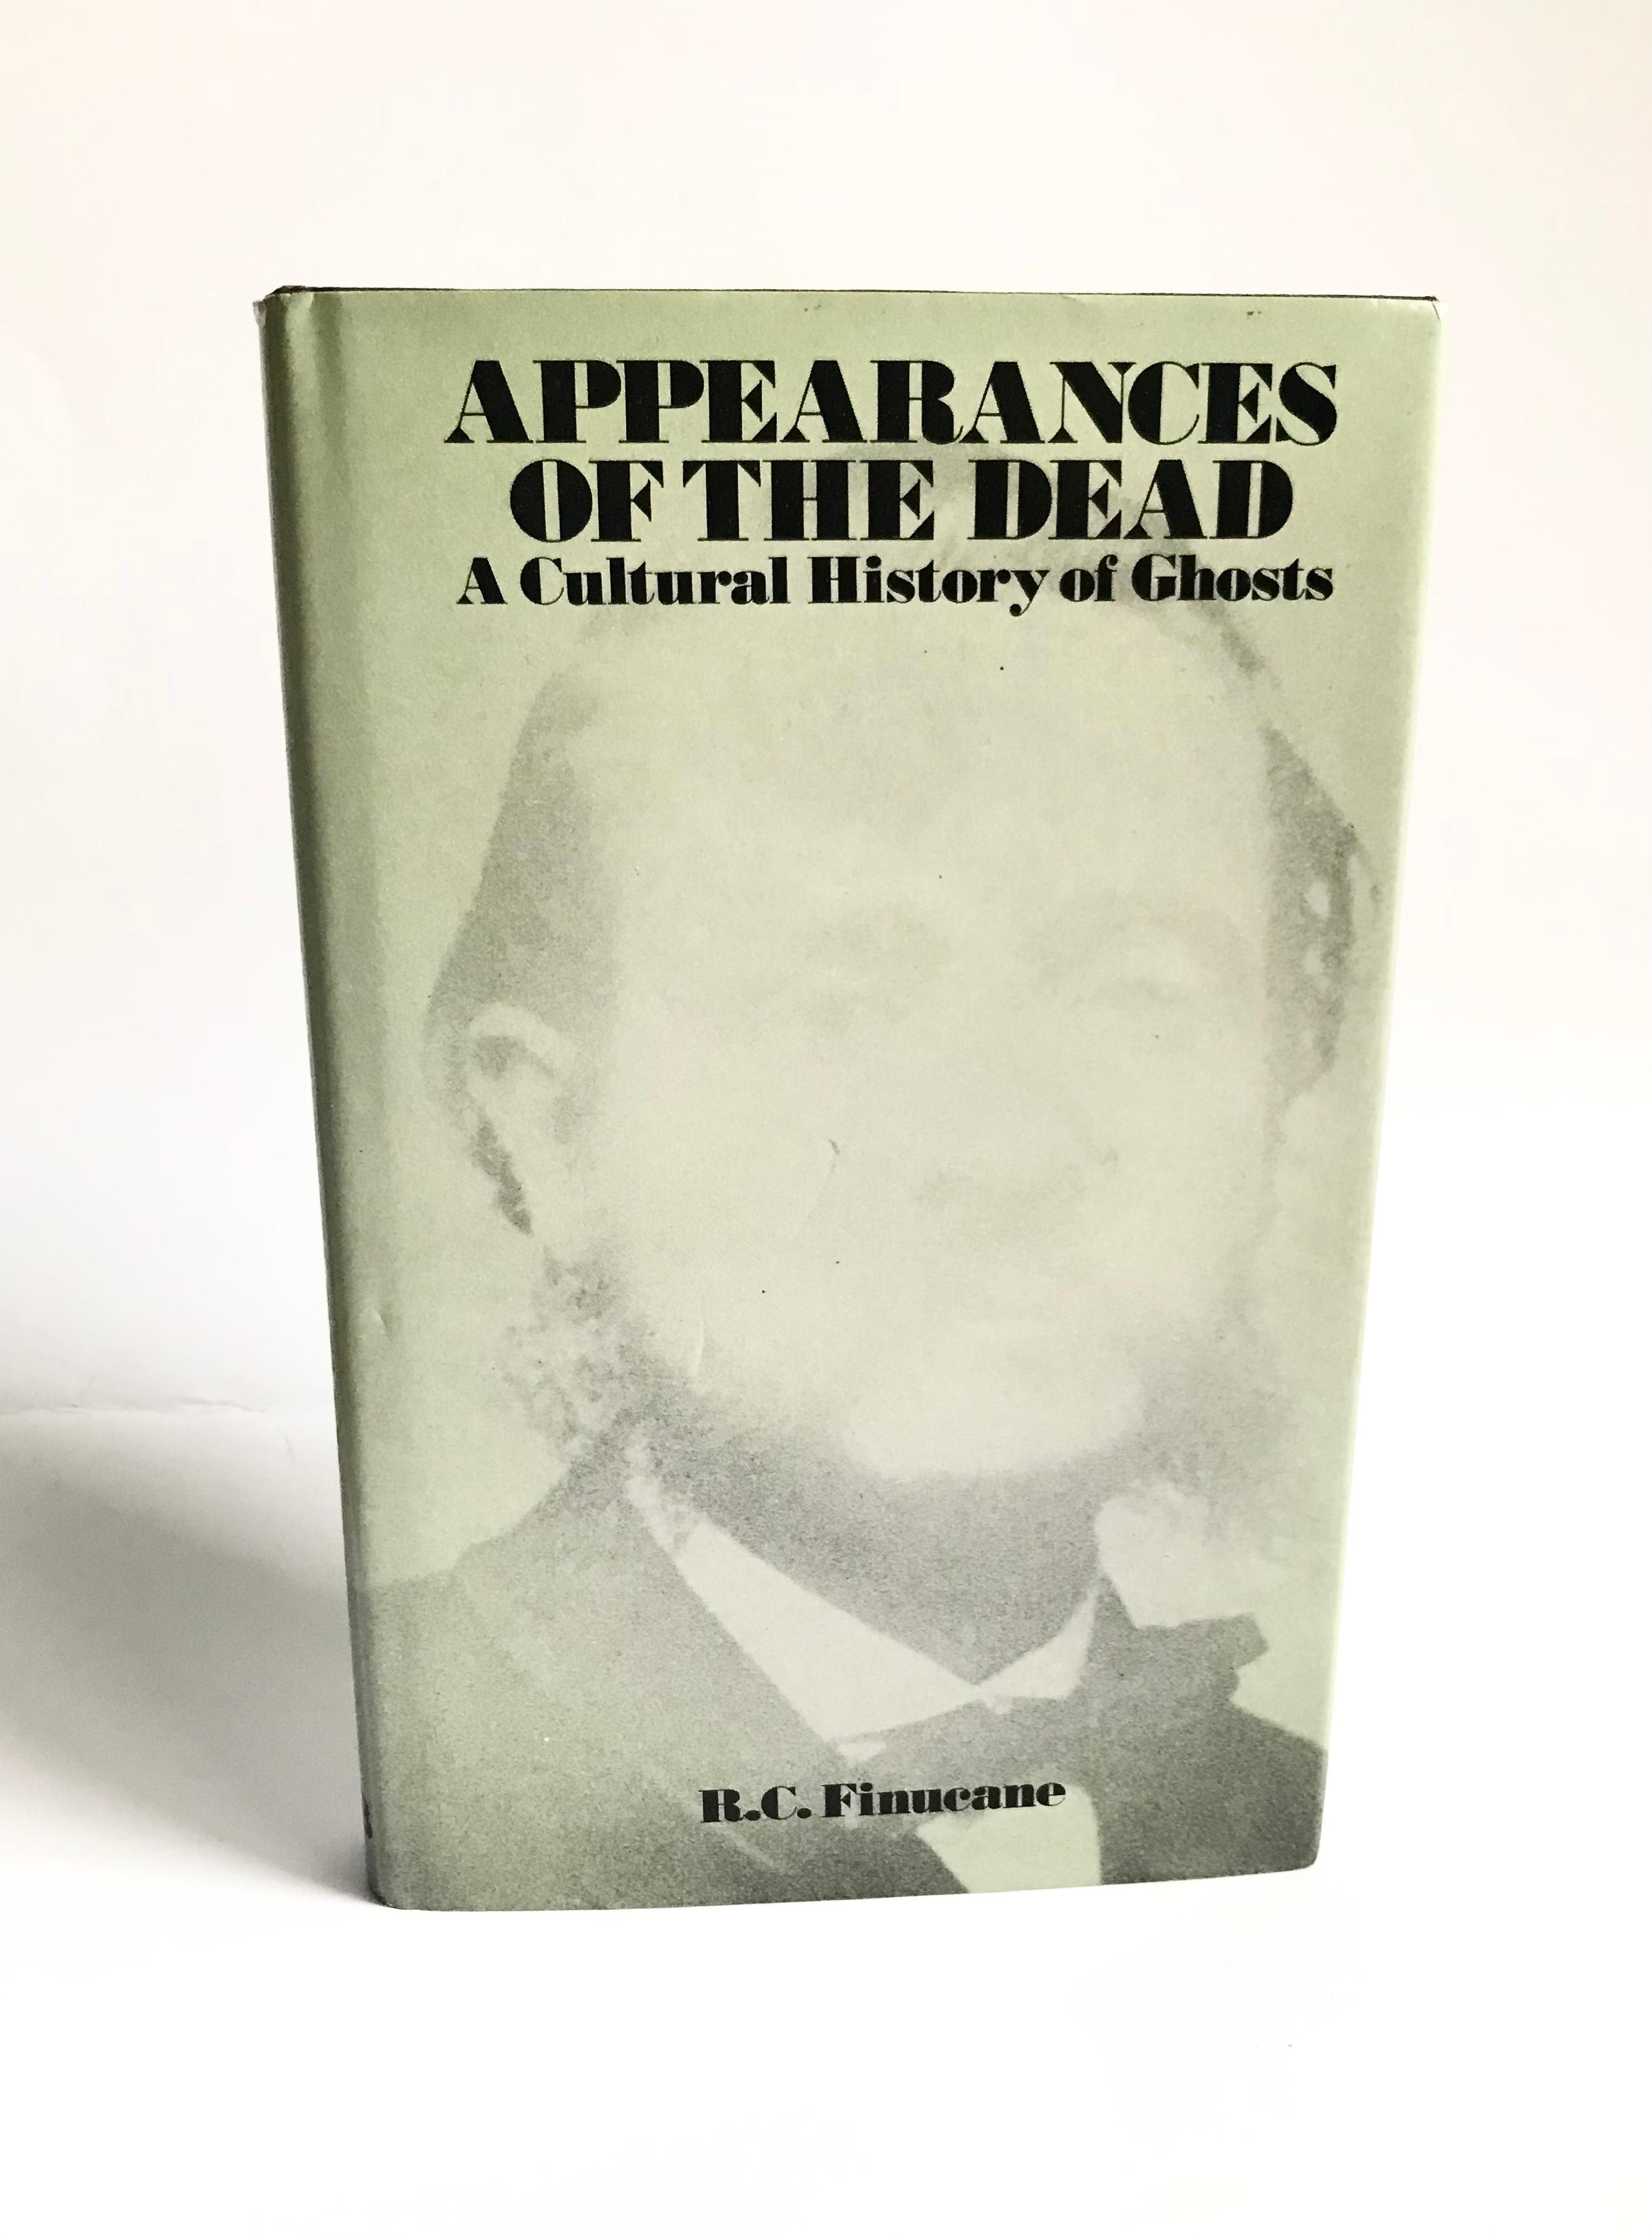 Appearances of The Dead: A Cultural History of Ghosts by R. C. Finucane